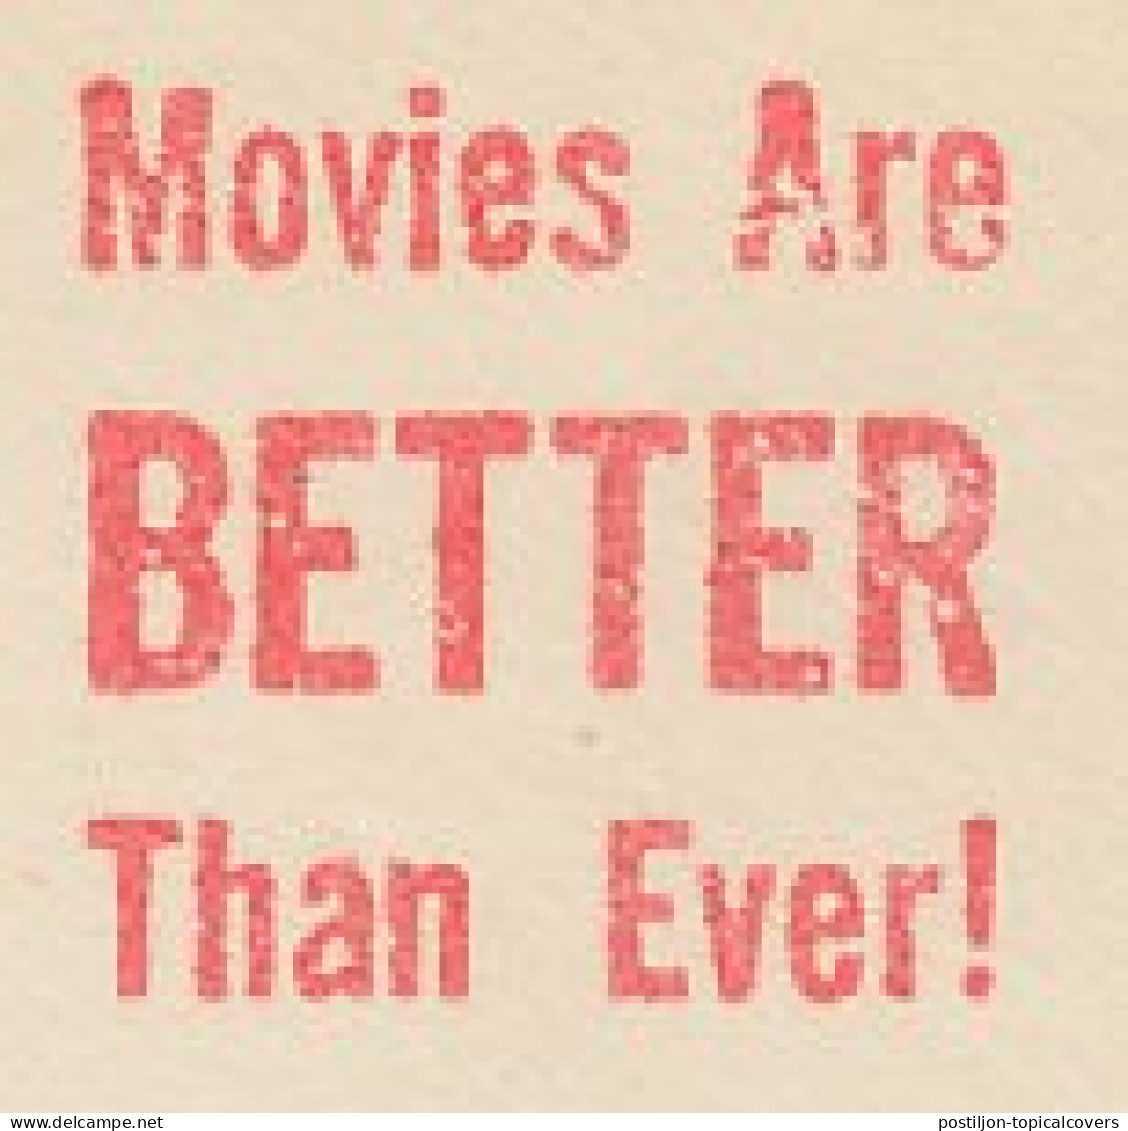 Meter Cut USA 1950 Movies Are Better Than Ever - Kino